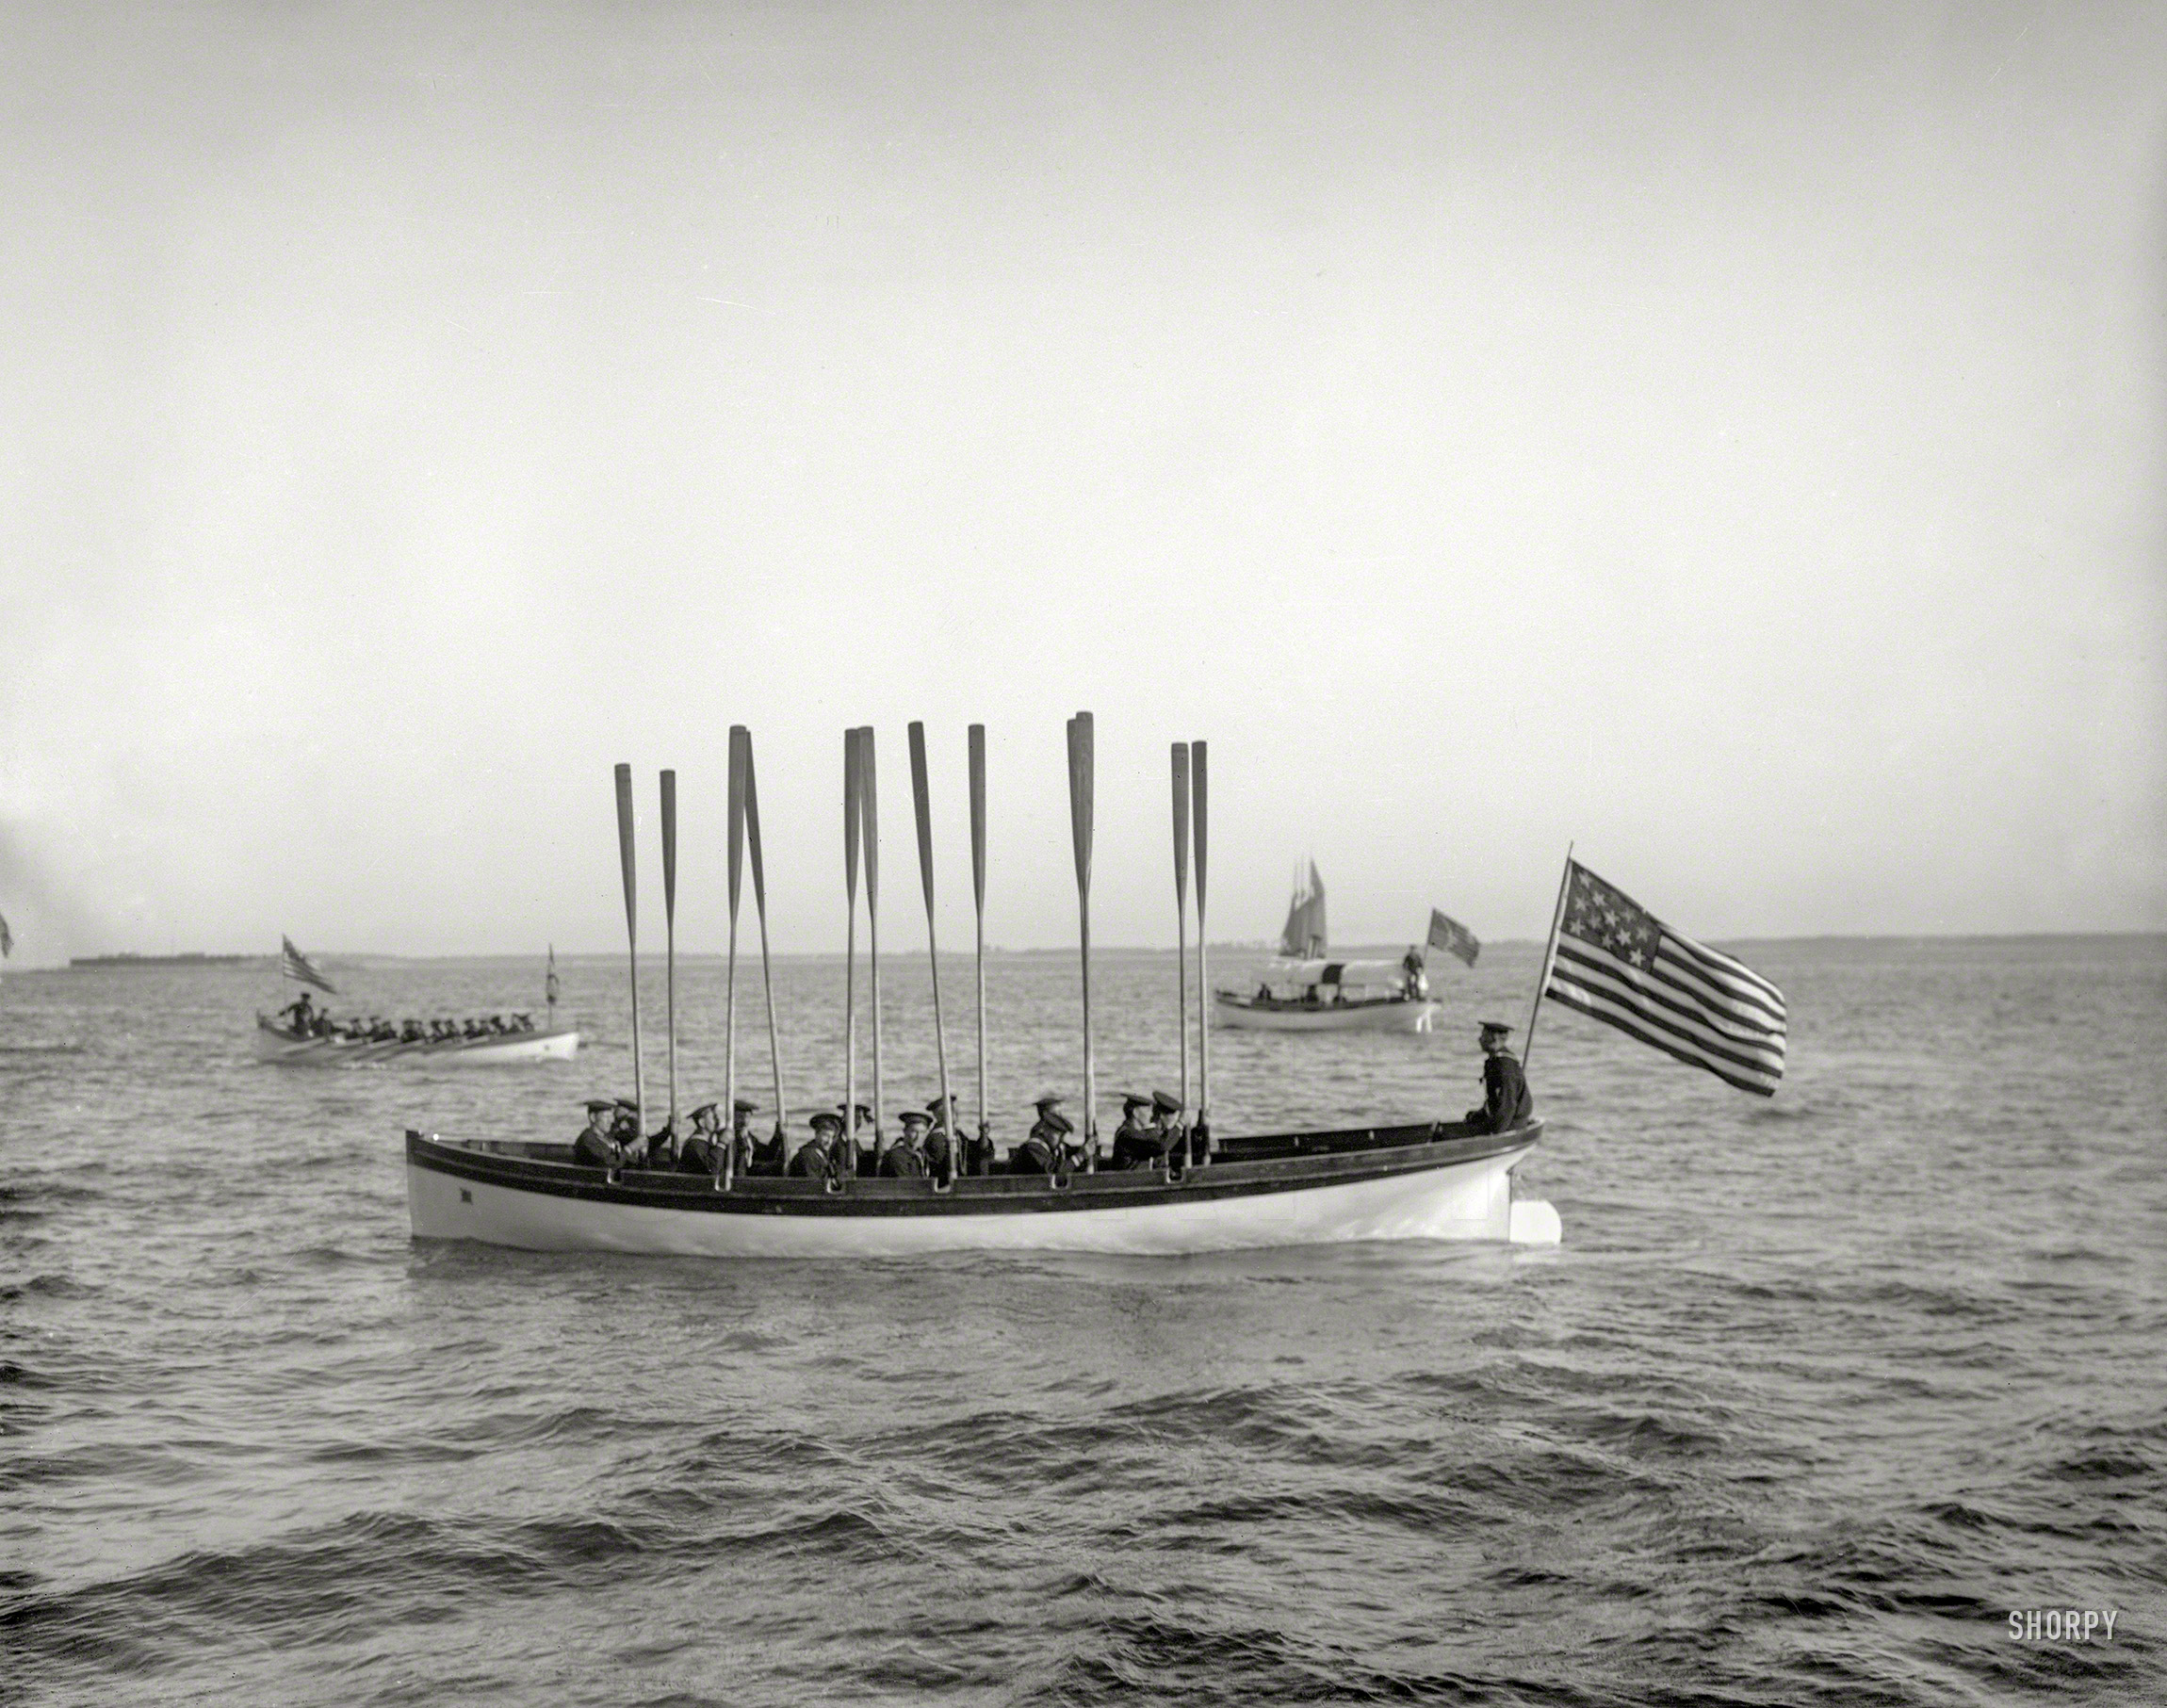 Drill No. 1: "The Difference Between Oars and Sails."
1899. "Boat drill -- U.S.S. New York." 8x10 inch dry plate glass negative by Edward H. Hart, Detroit Photographic Company. View full size.